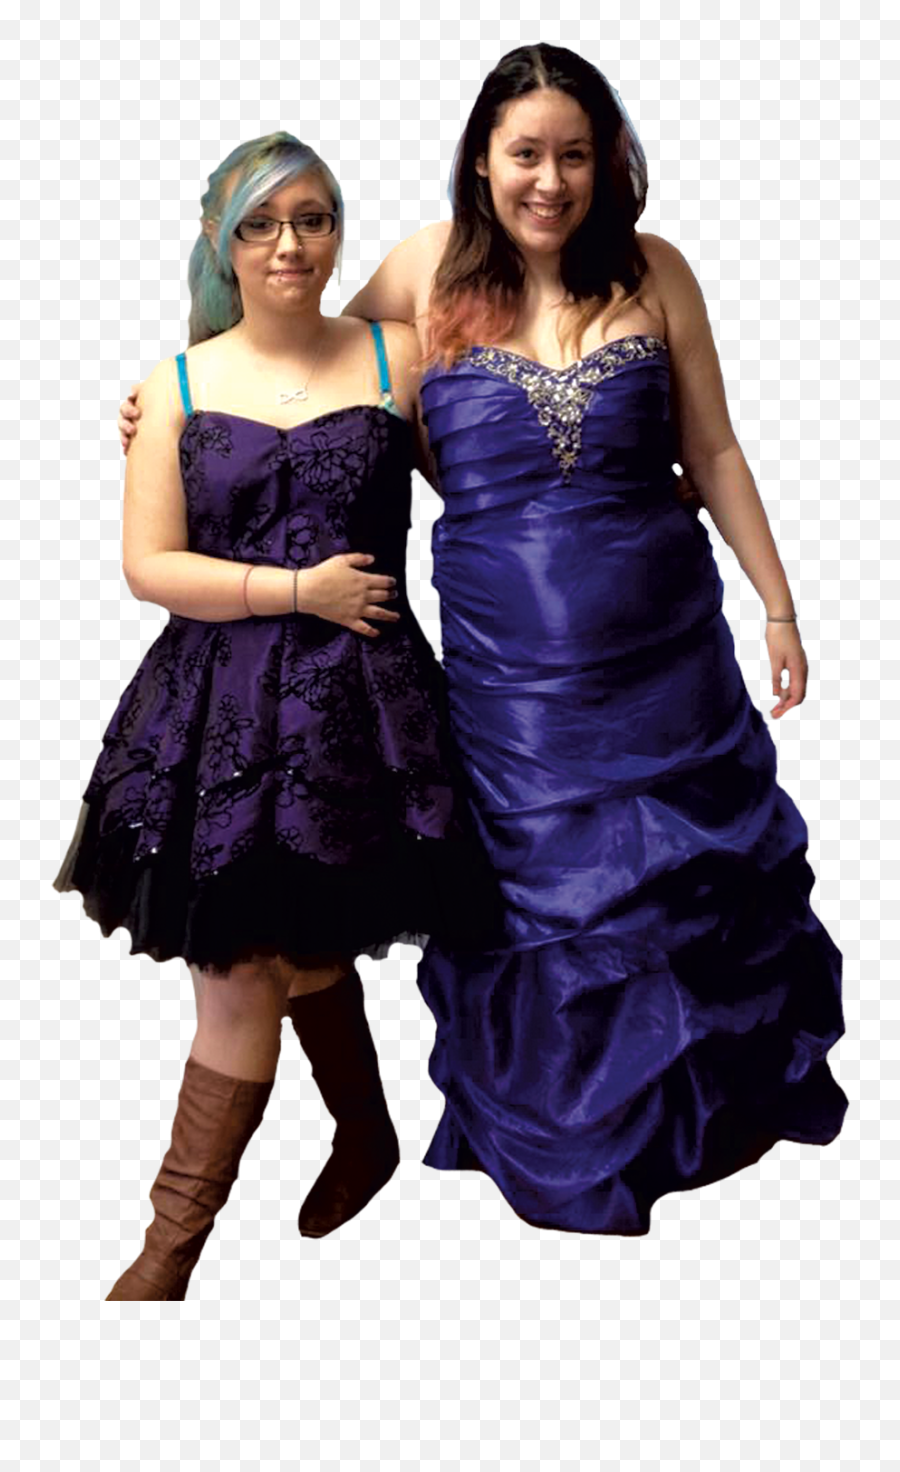 Highgate Public Library Hosts Prom - Dress Drive The Kids Cocktail Dress Png,Prom Dress Png